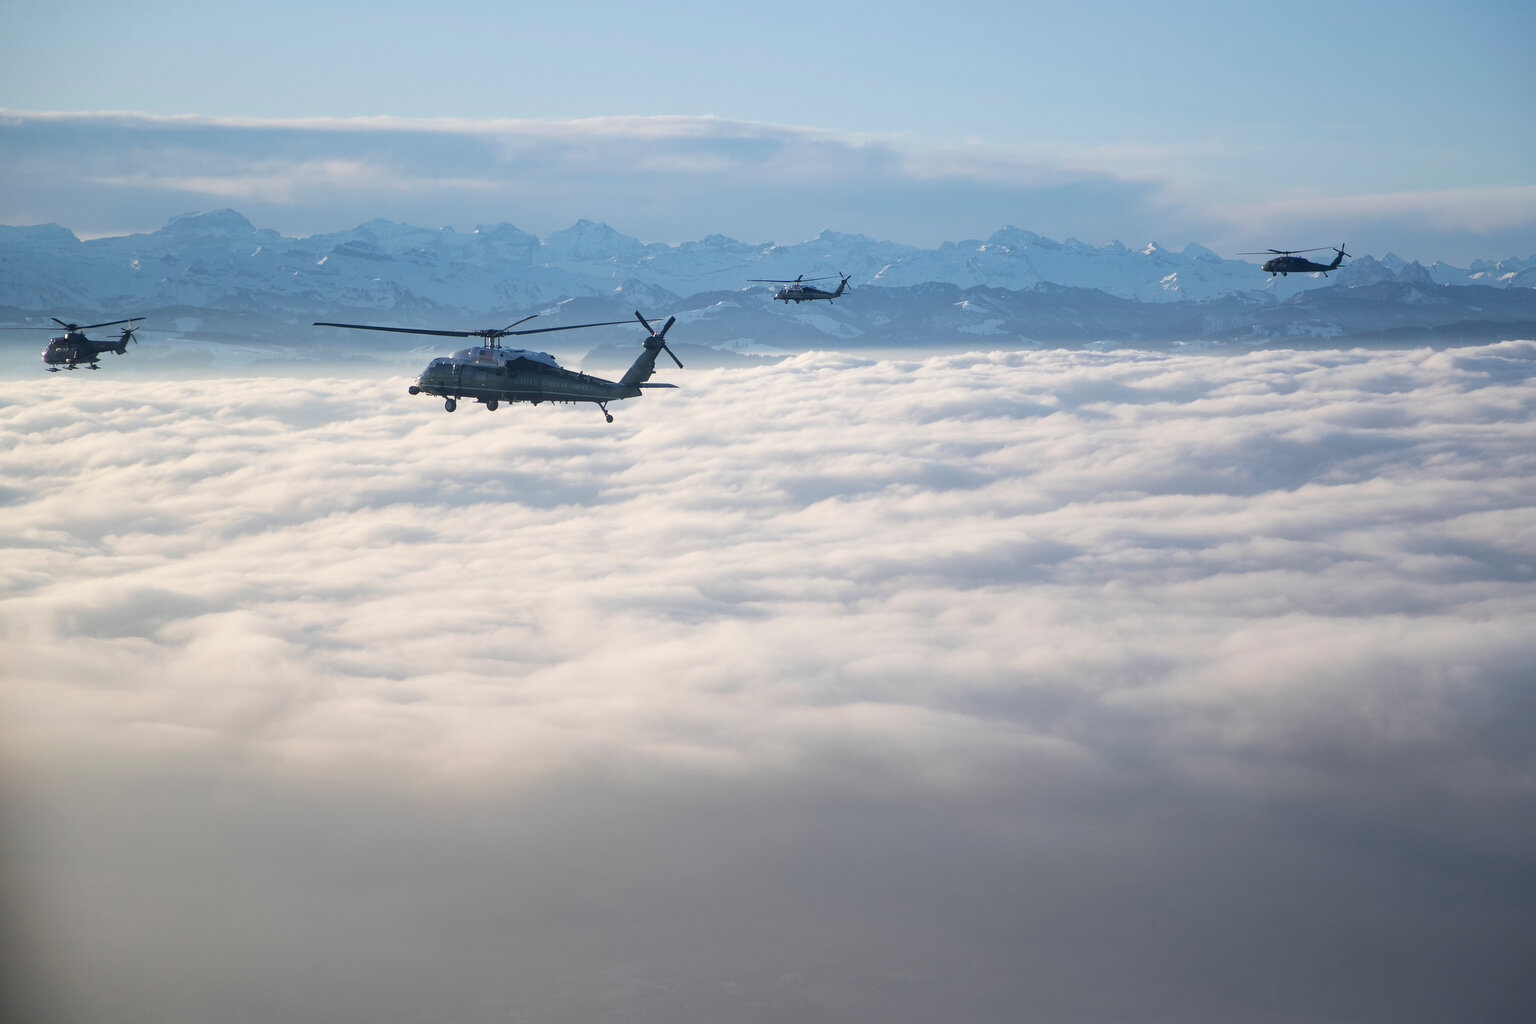  Marine One carrying US President Donald Trump travels to the Davos landing zone in Switzerland, Tuesday, Jan. 21, 2020.  (AP Photo/Evan Vucci) 